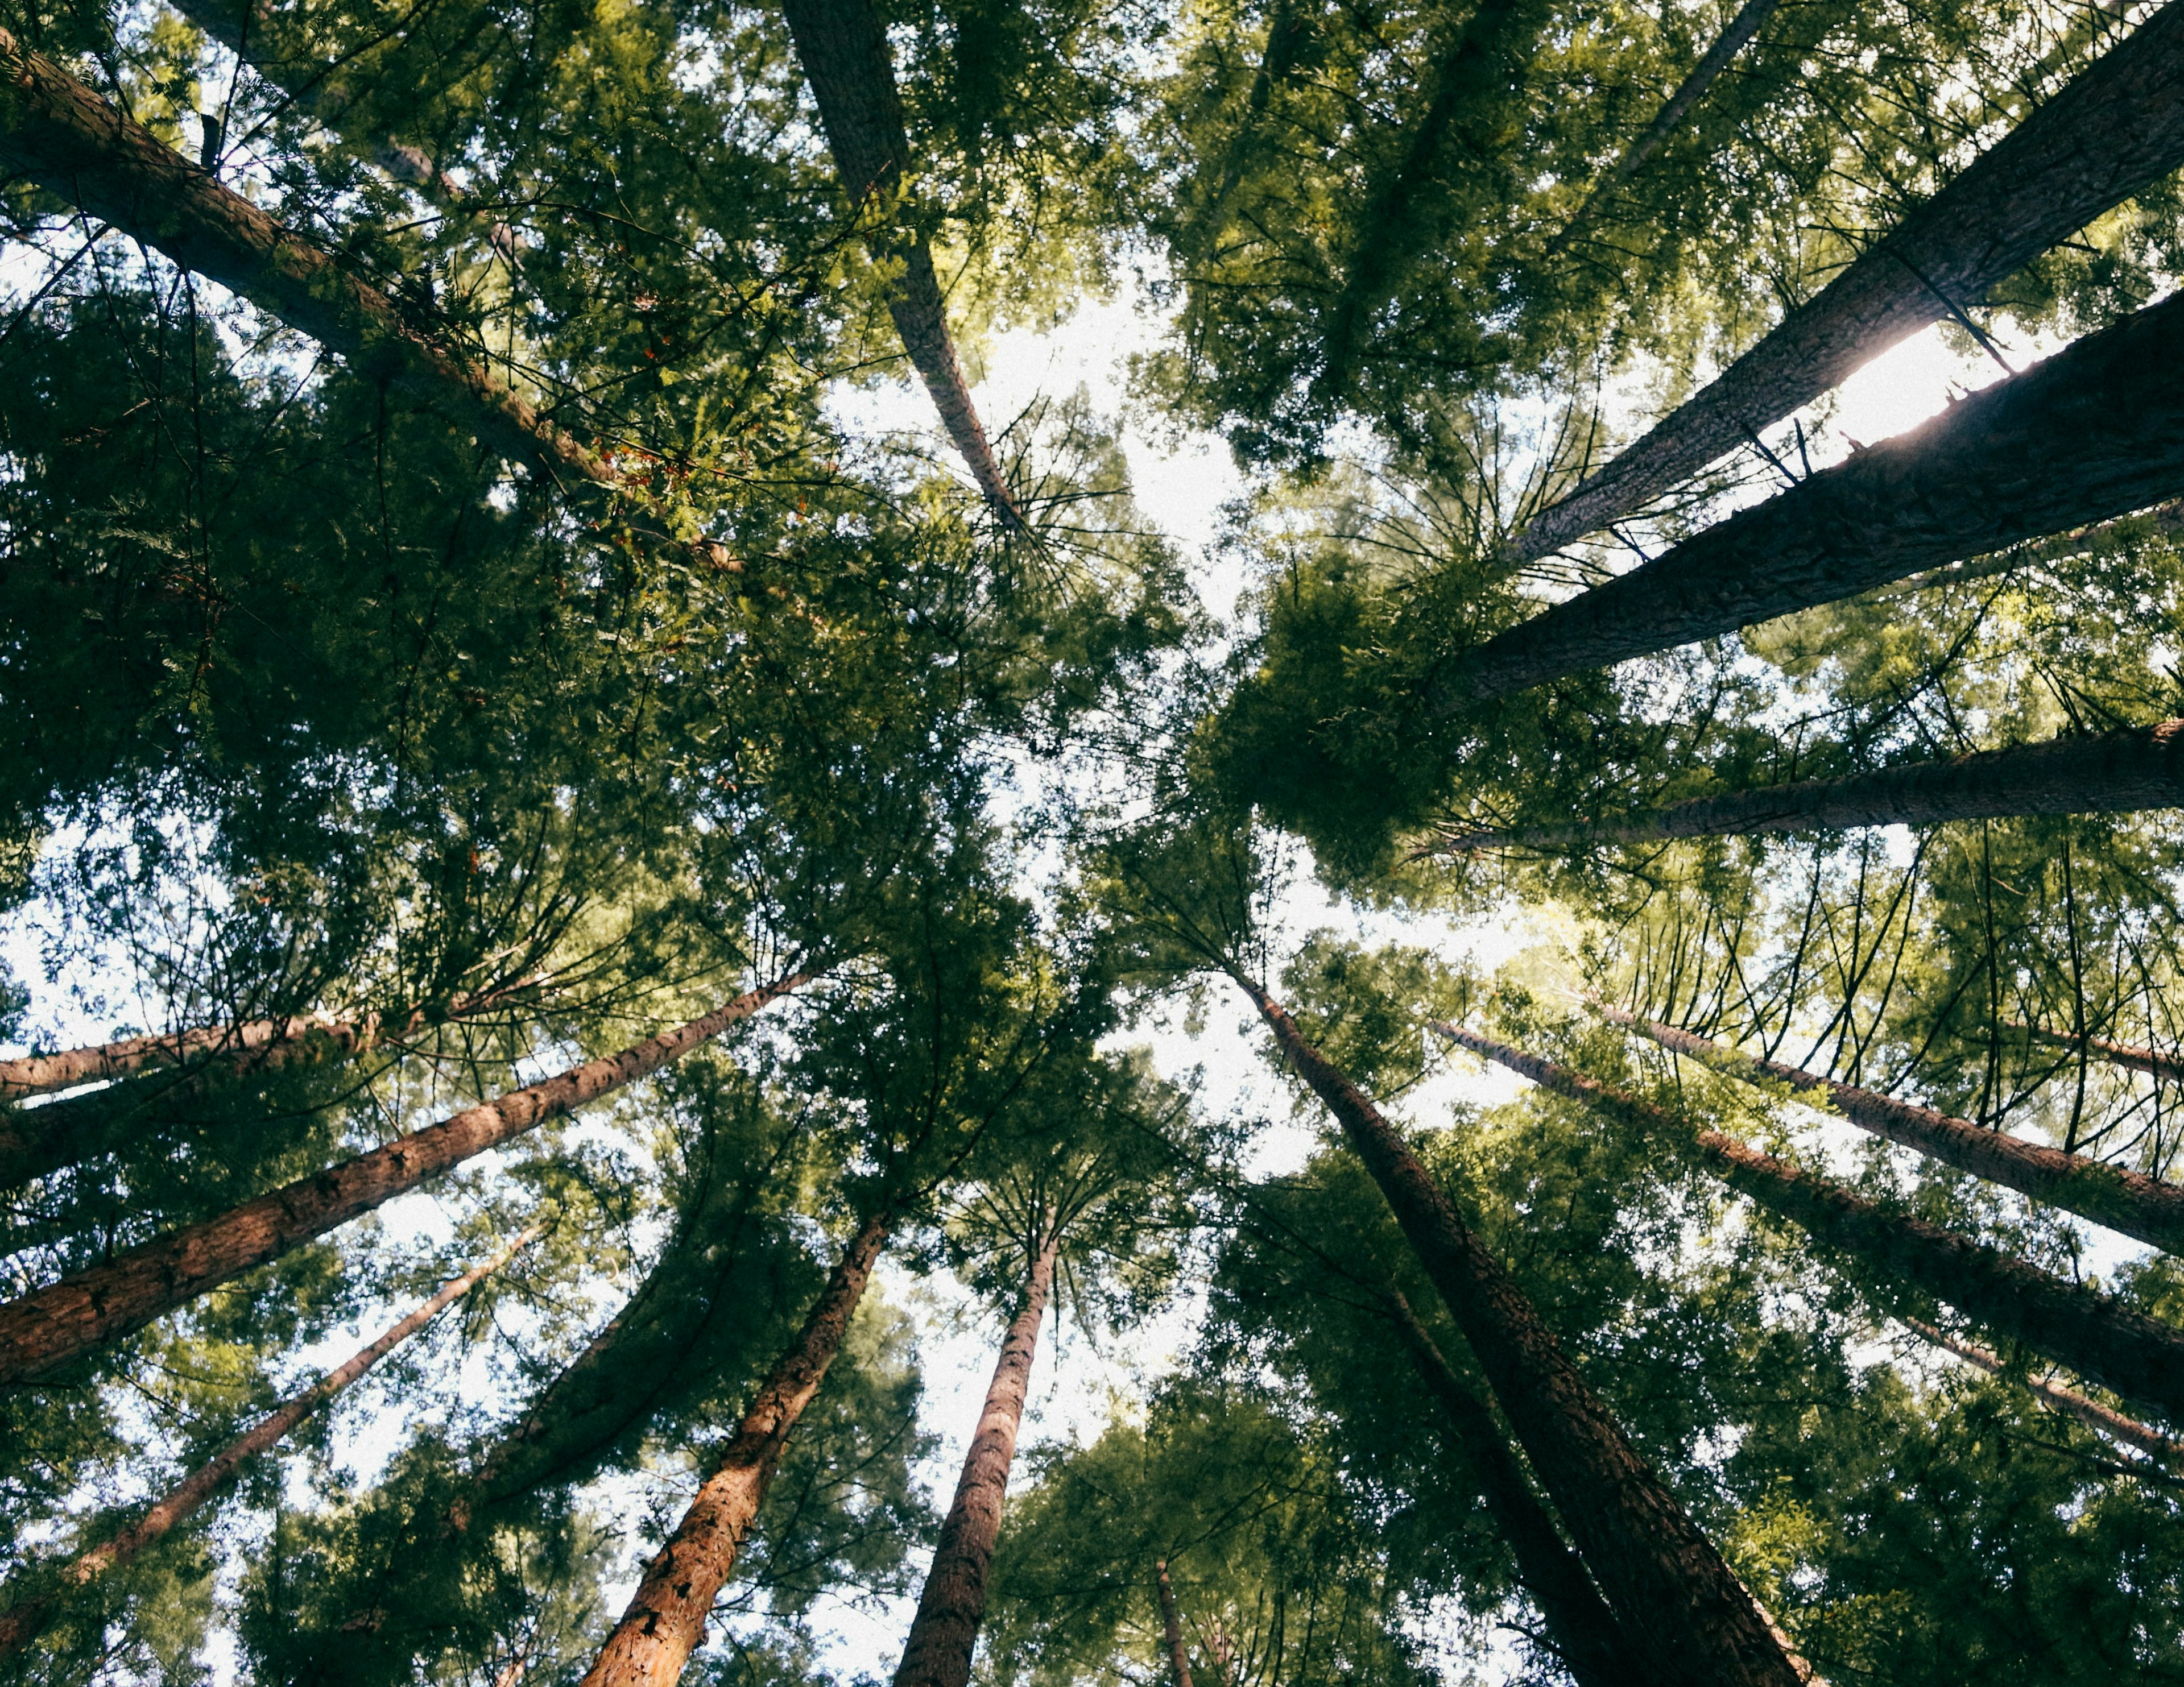 first-hand view of looking up at tall trees from the ground